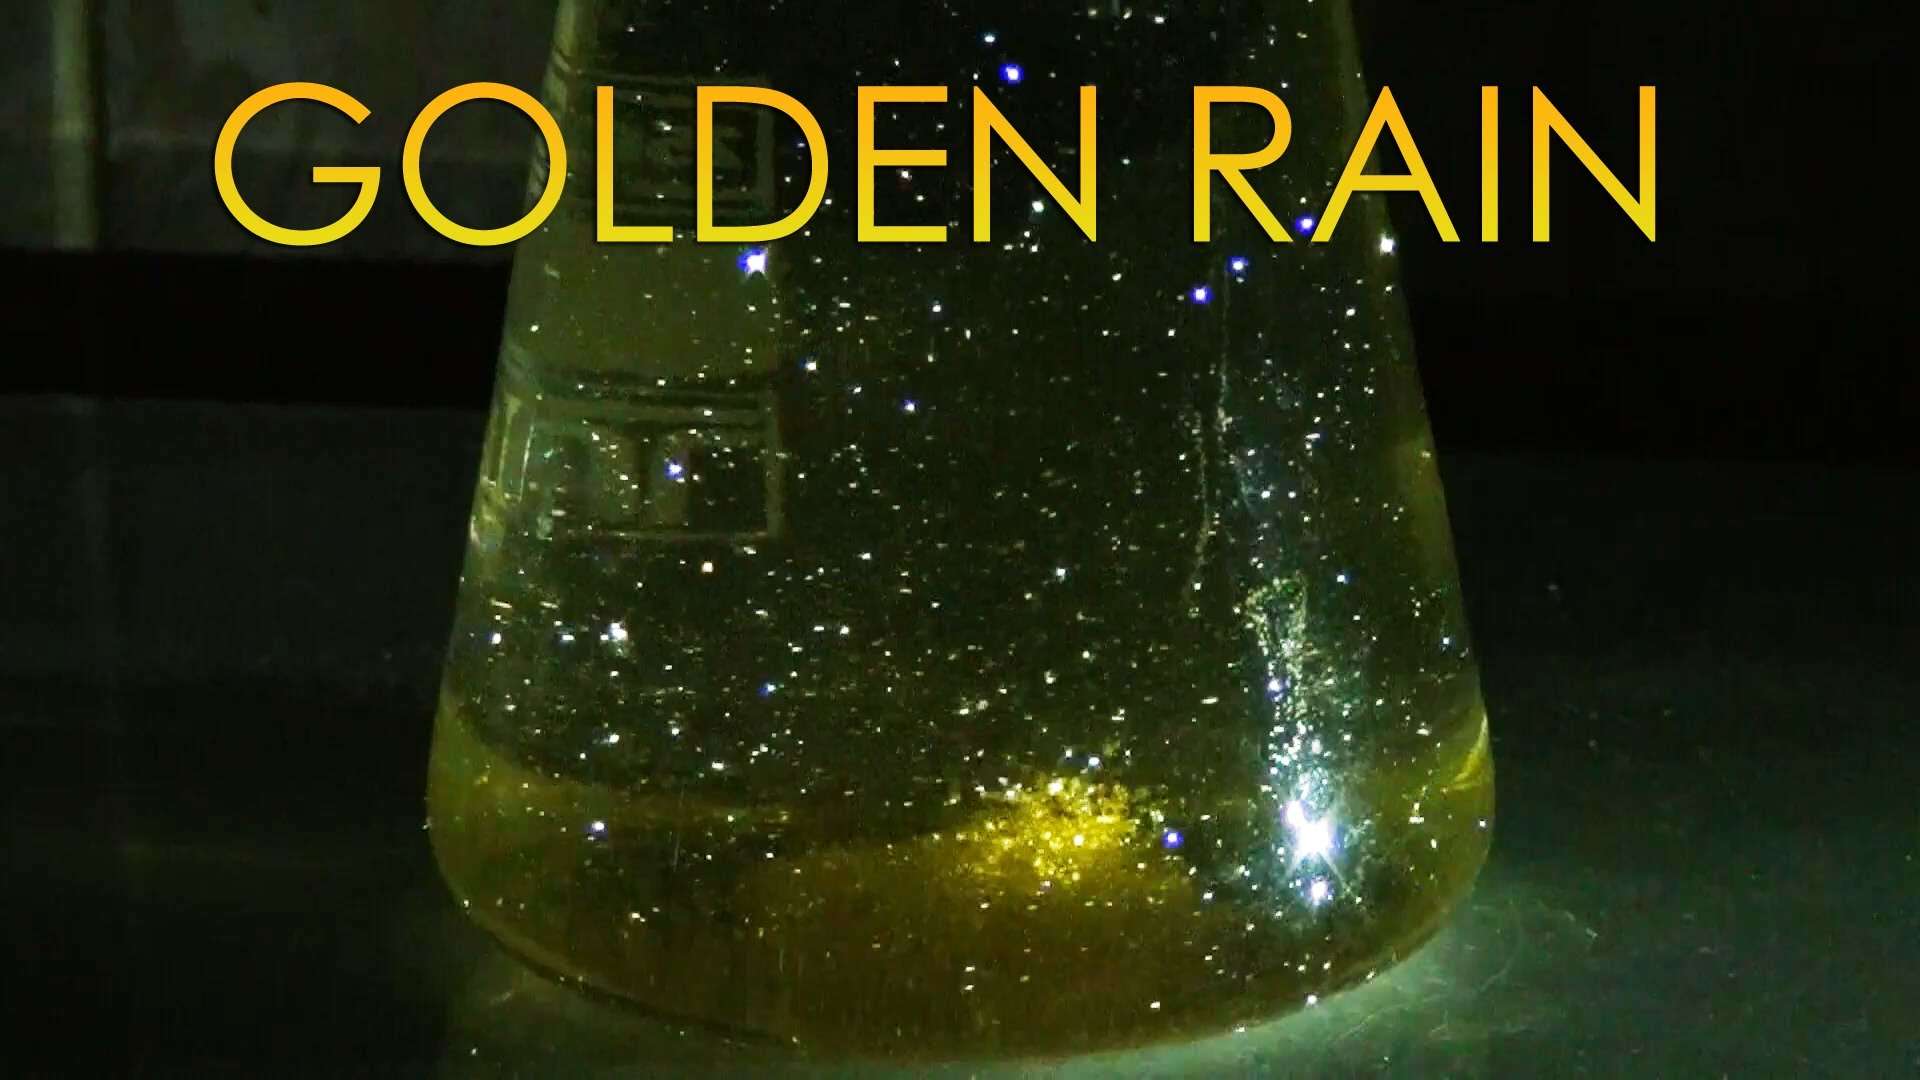 Golden Rain - Growing crystals of lead iodide. Chemical reaction.